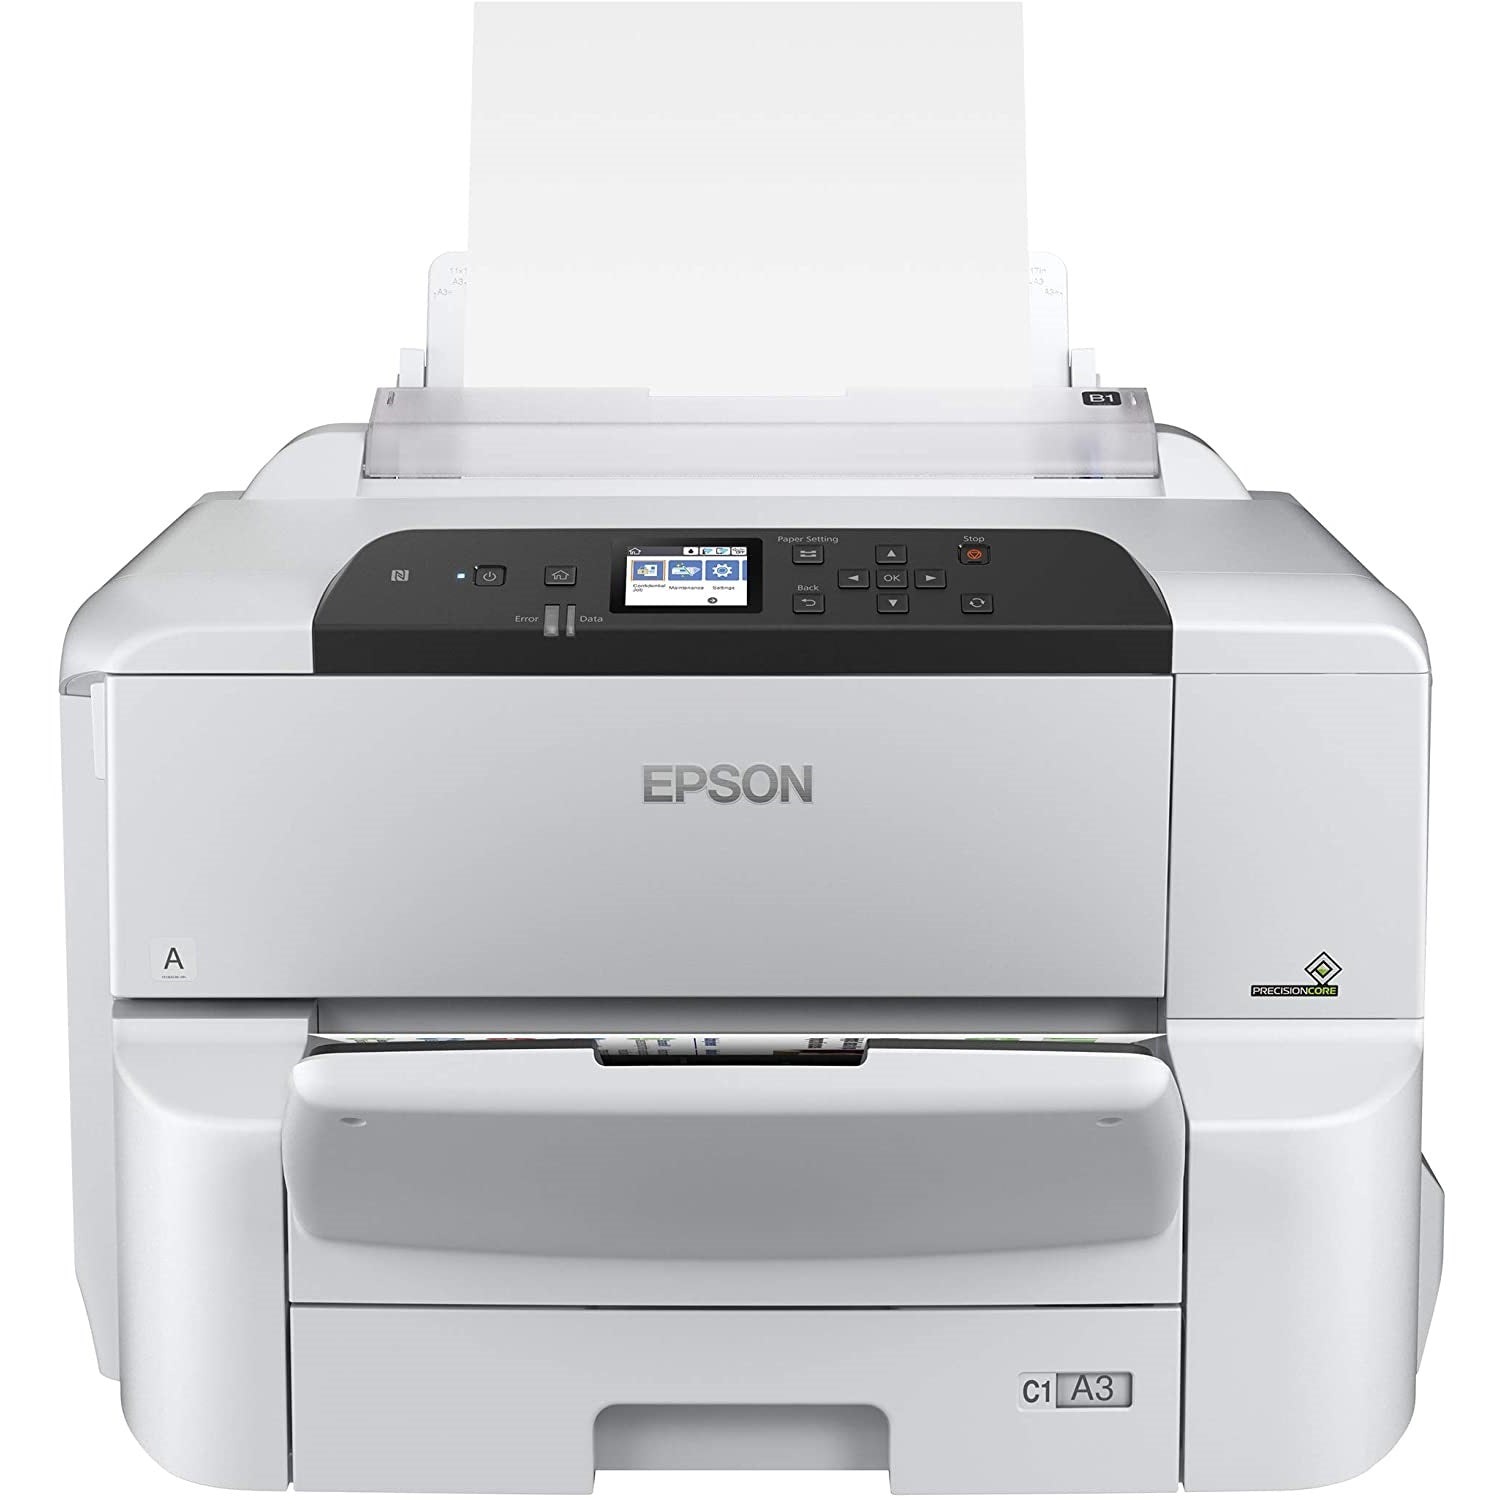 Absolute Toner $35/Month New Epson WorkForce Pro WF-C8190 A3 Color Inkjet Printer With Wi-Fi Connectivity For Sale in Canada Showroom Color Copier